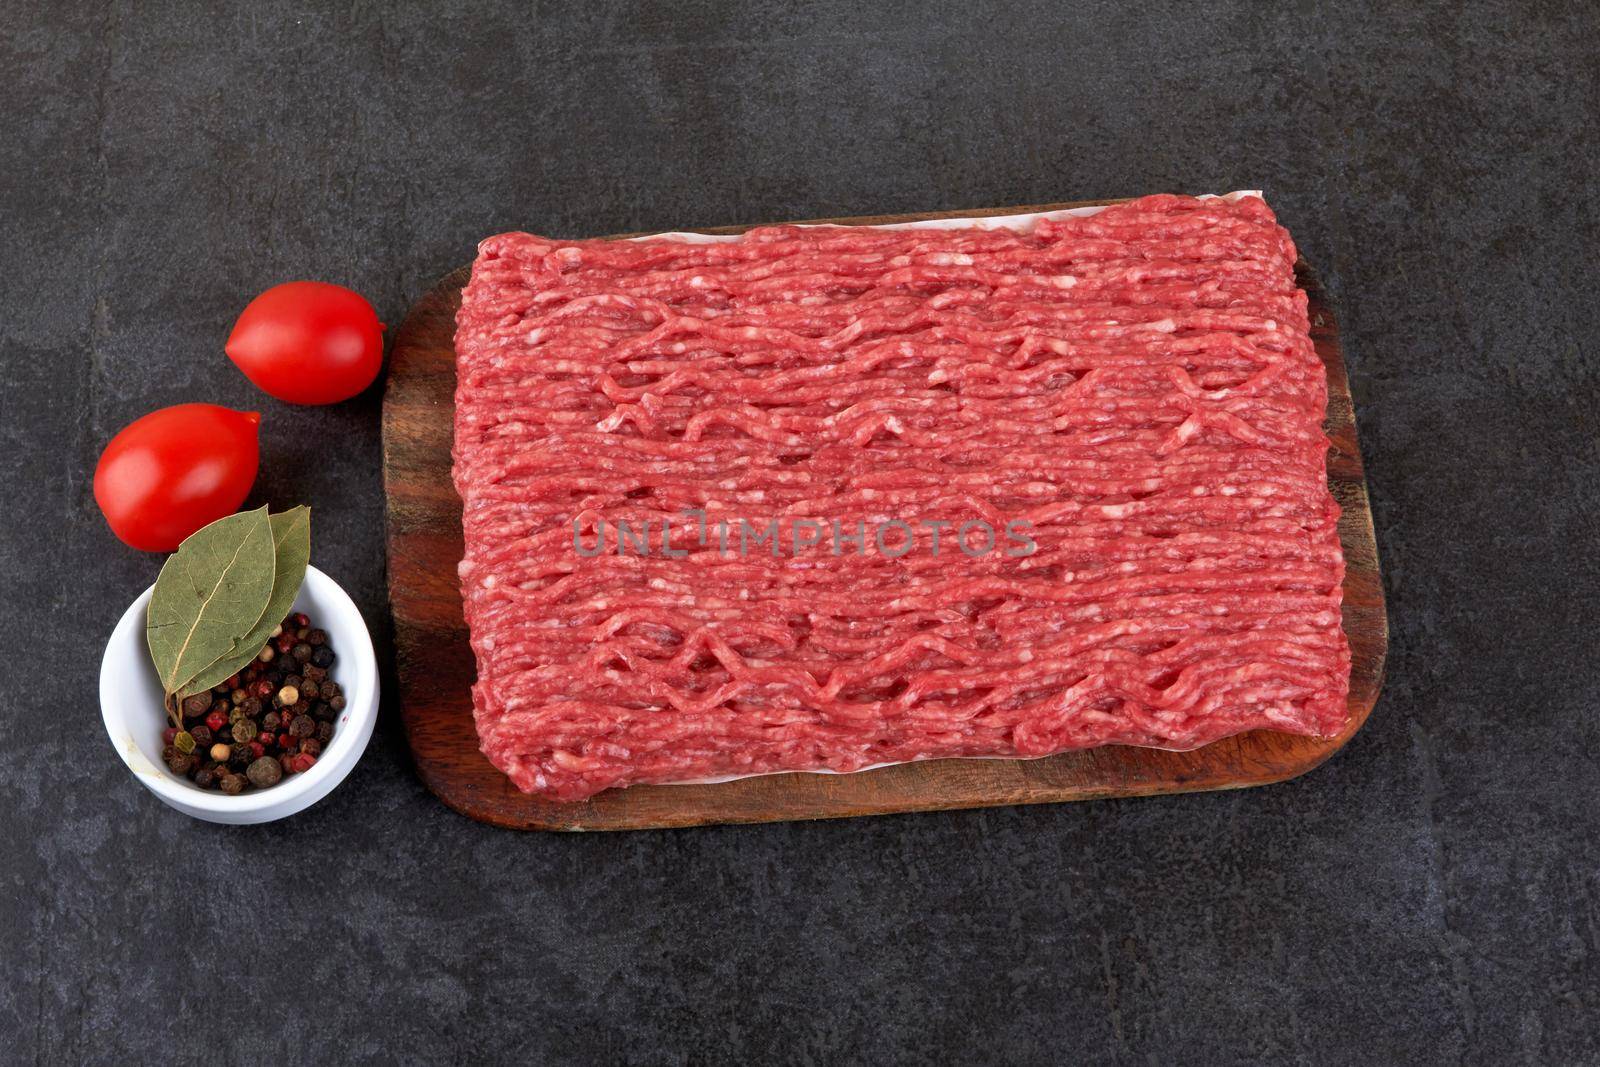 Fresh pork and beef minced meat on a black